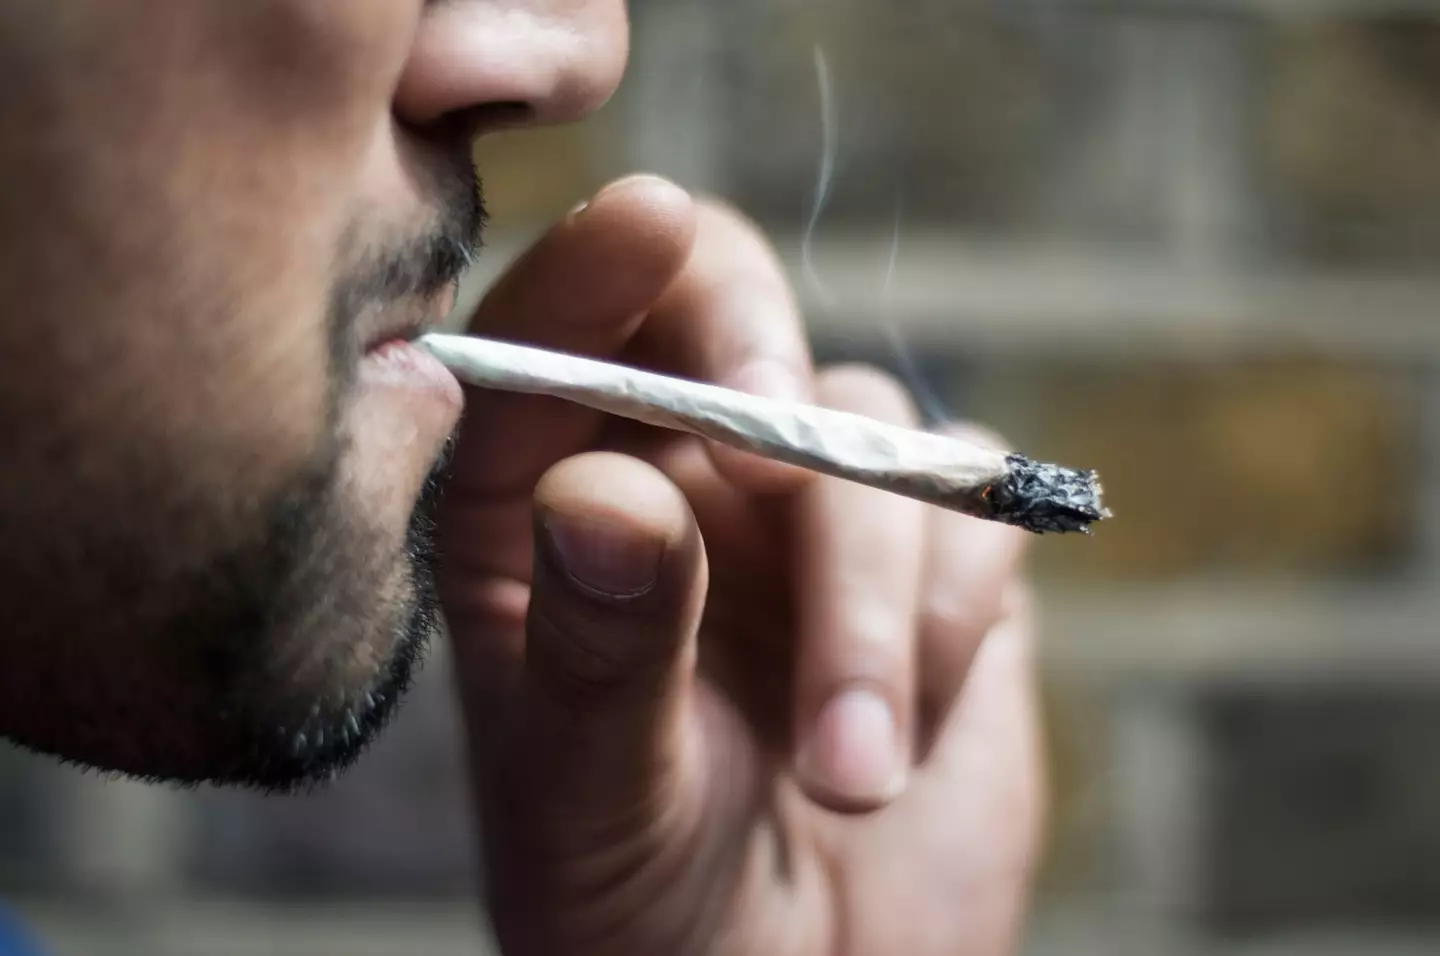 Joints are no laughing matter, the PCC says.